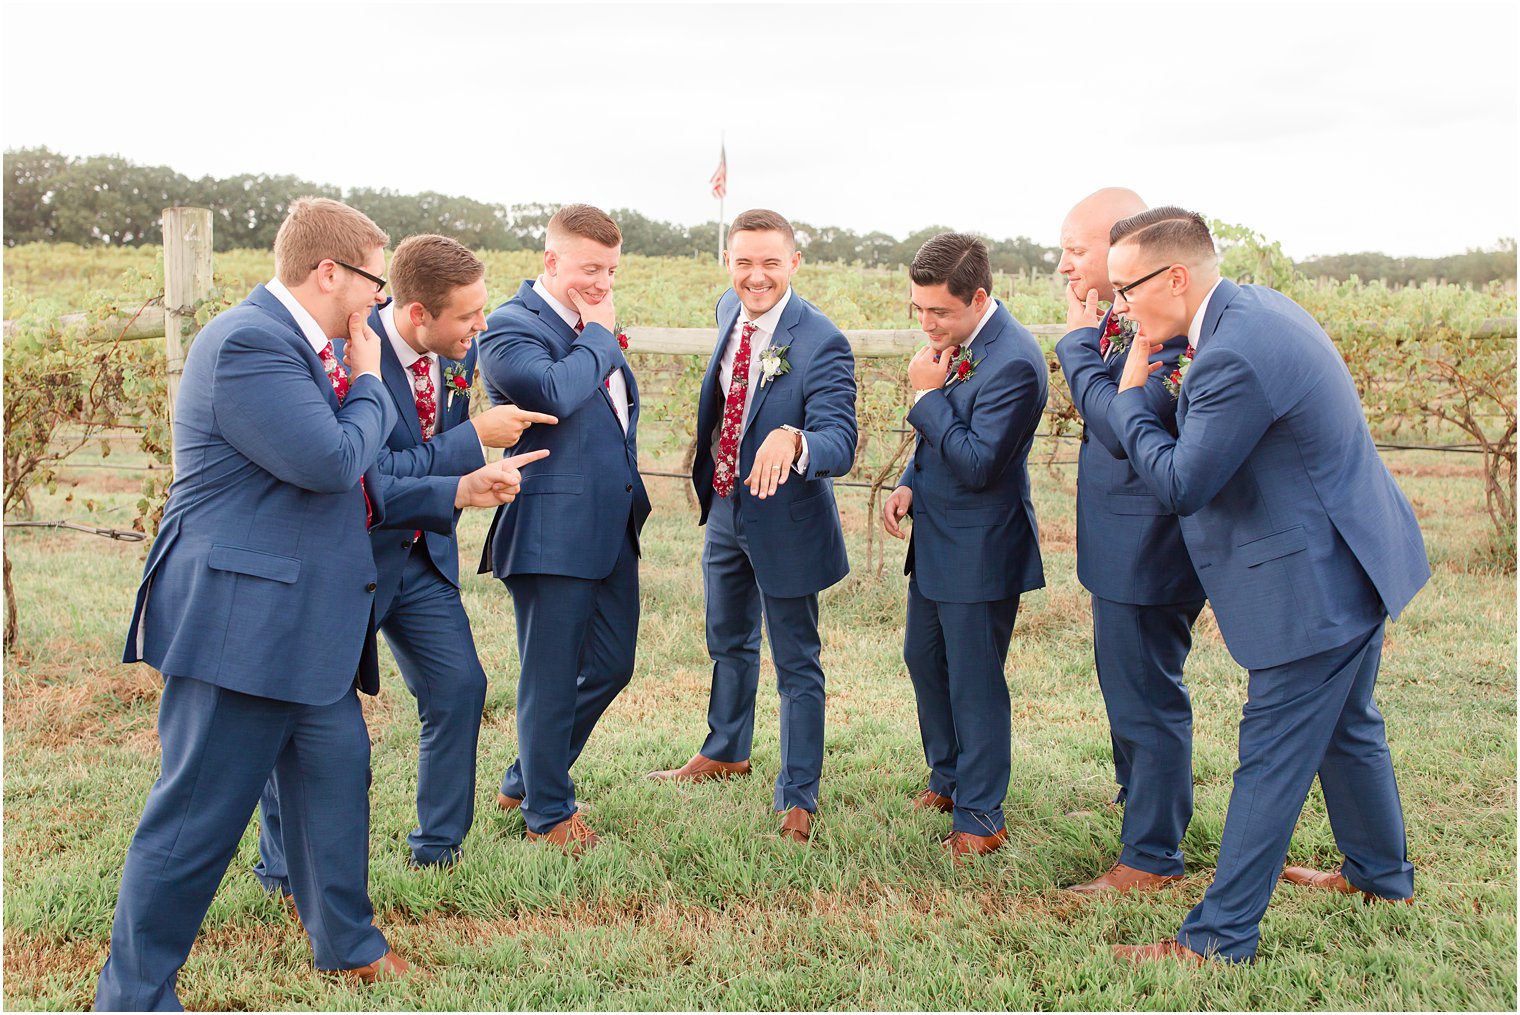 Groom showing off his ring to his groomsmen